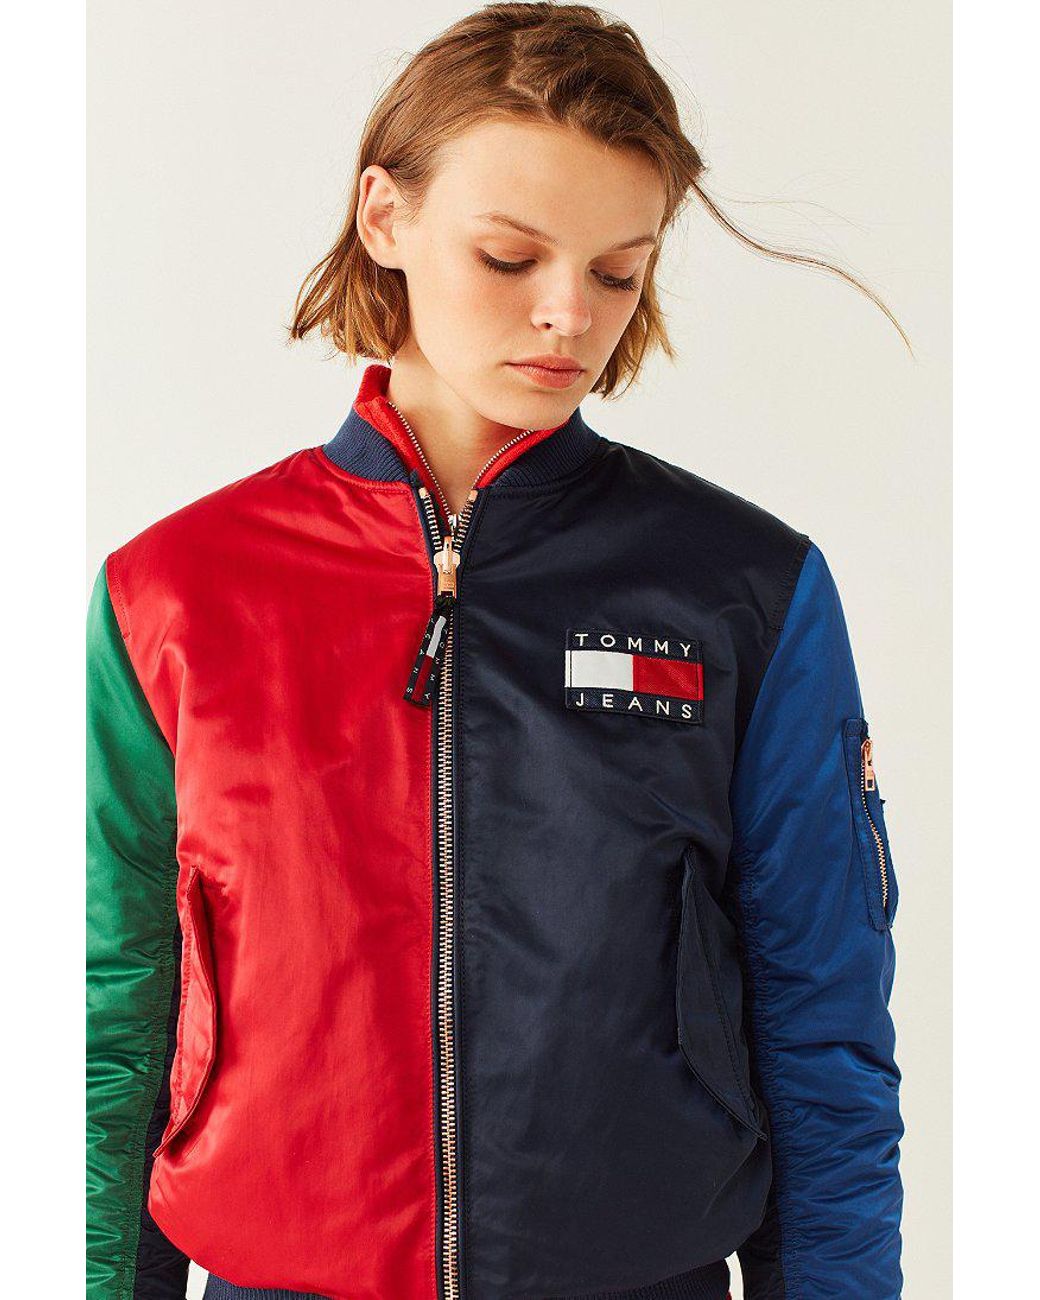 Tommy Tommy Jeans '90s Reversible Bomber Jacket Blue | Lyst